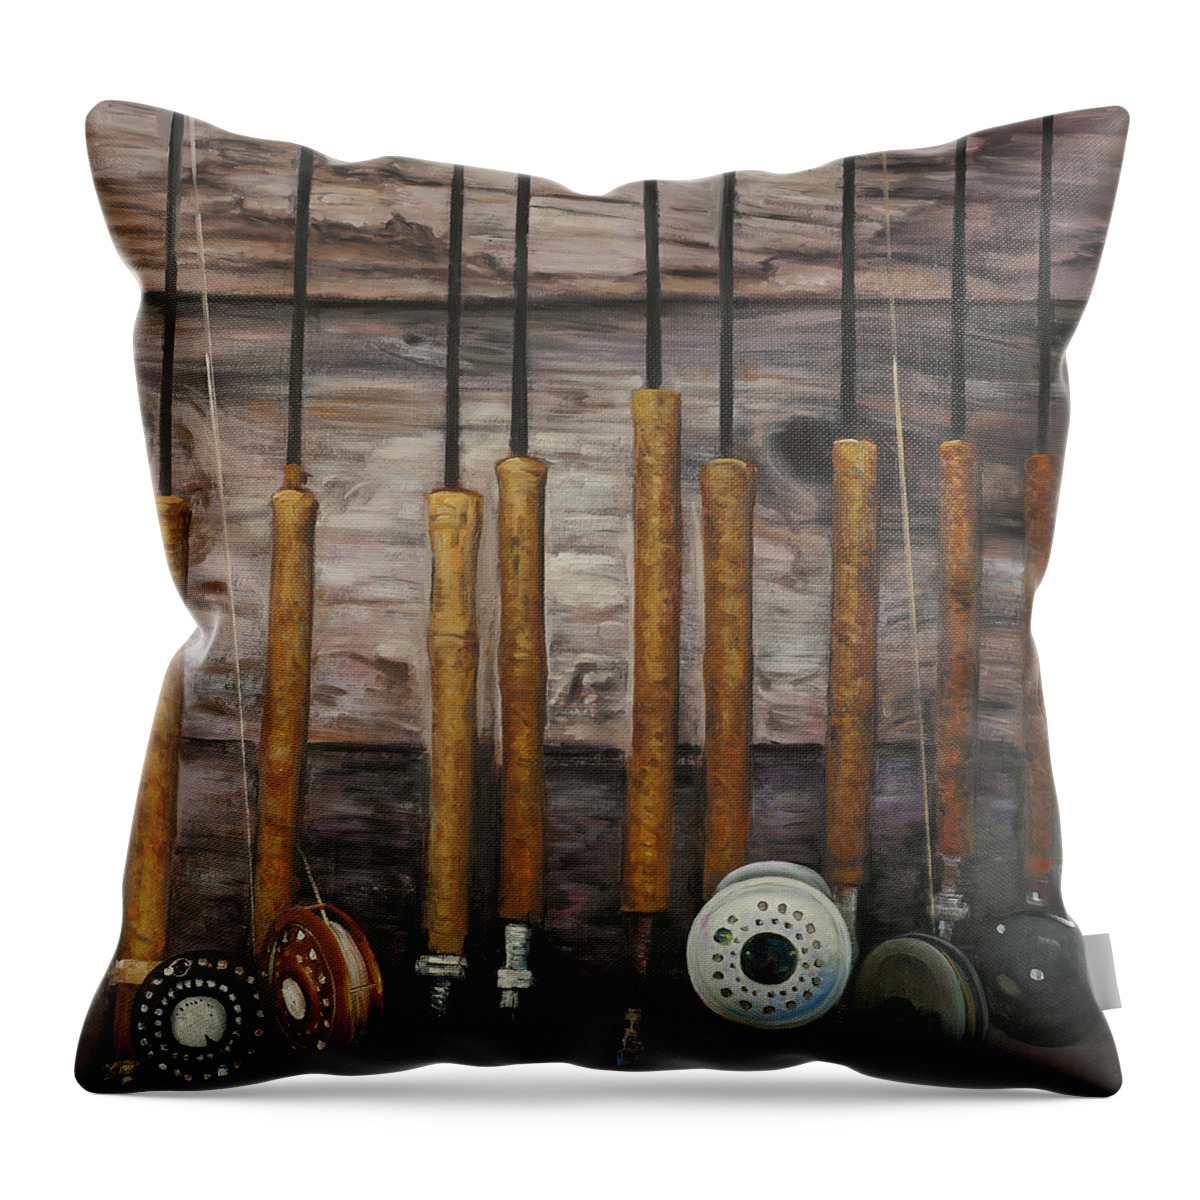 Vintage Fishing Rods Throw Pillow